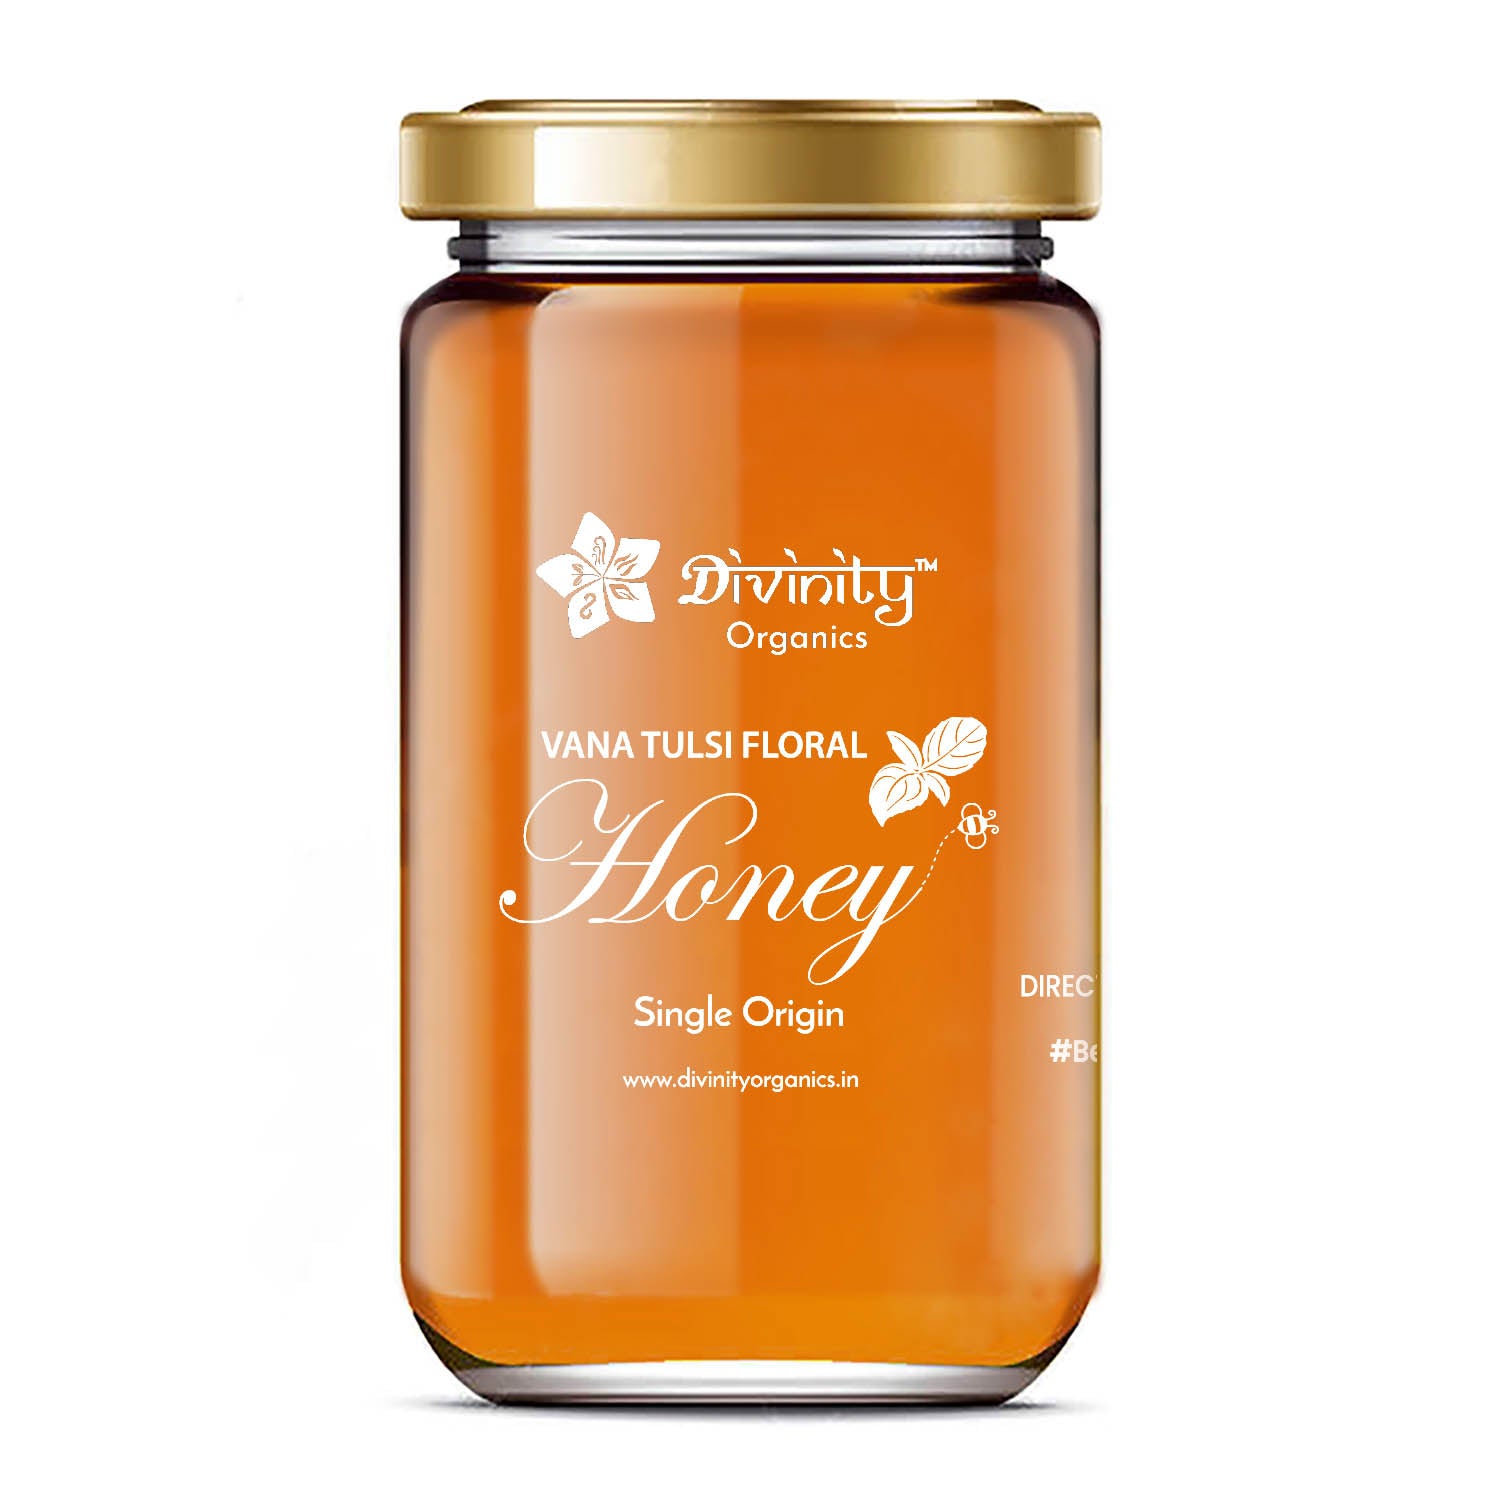 Divinity Organics - Vana Tulsi Honey: A magical elixir, honey made from the medicinal flower, vana tulsi that detoxifies and revitalizes your skin and body. It is one of the most ancient herbs and is known to have healing properties. It is especially known to cure cough, cold, and certain respiratory disorders. Adding this product to your diet will give you renewed energy, ease your stress, and will let you relax. This product is often known to help customers manage anxiety.